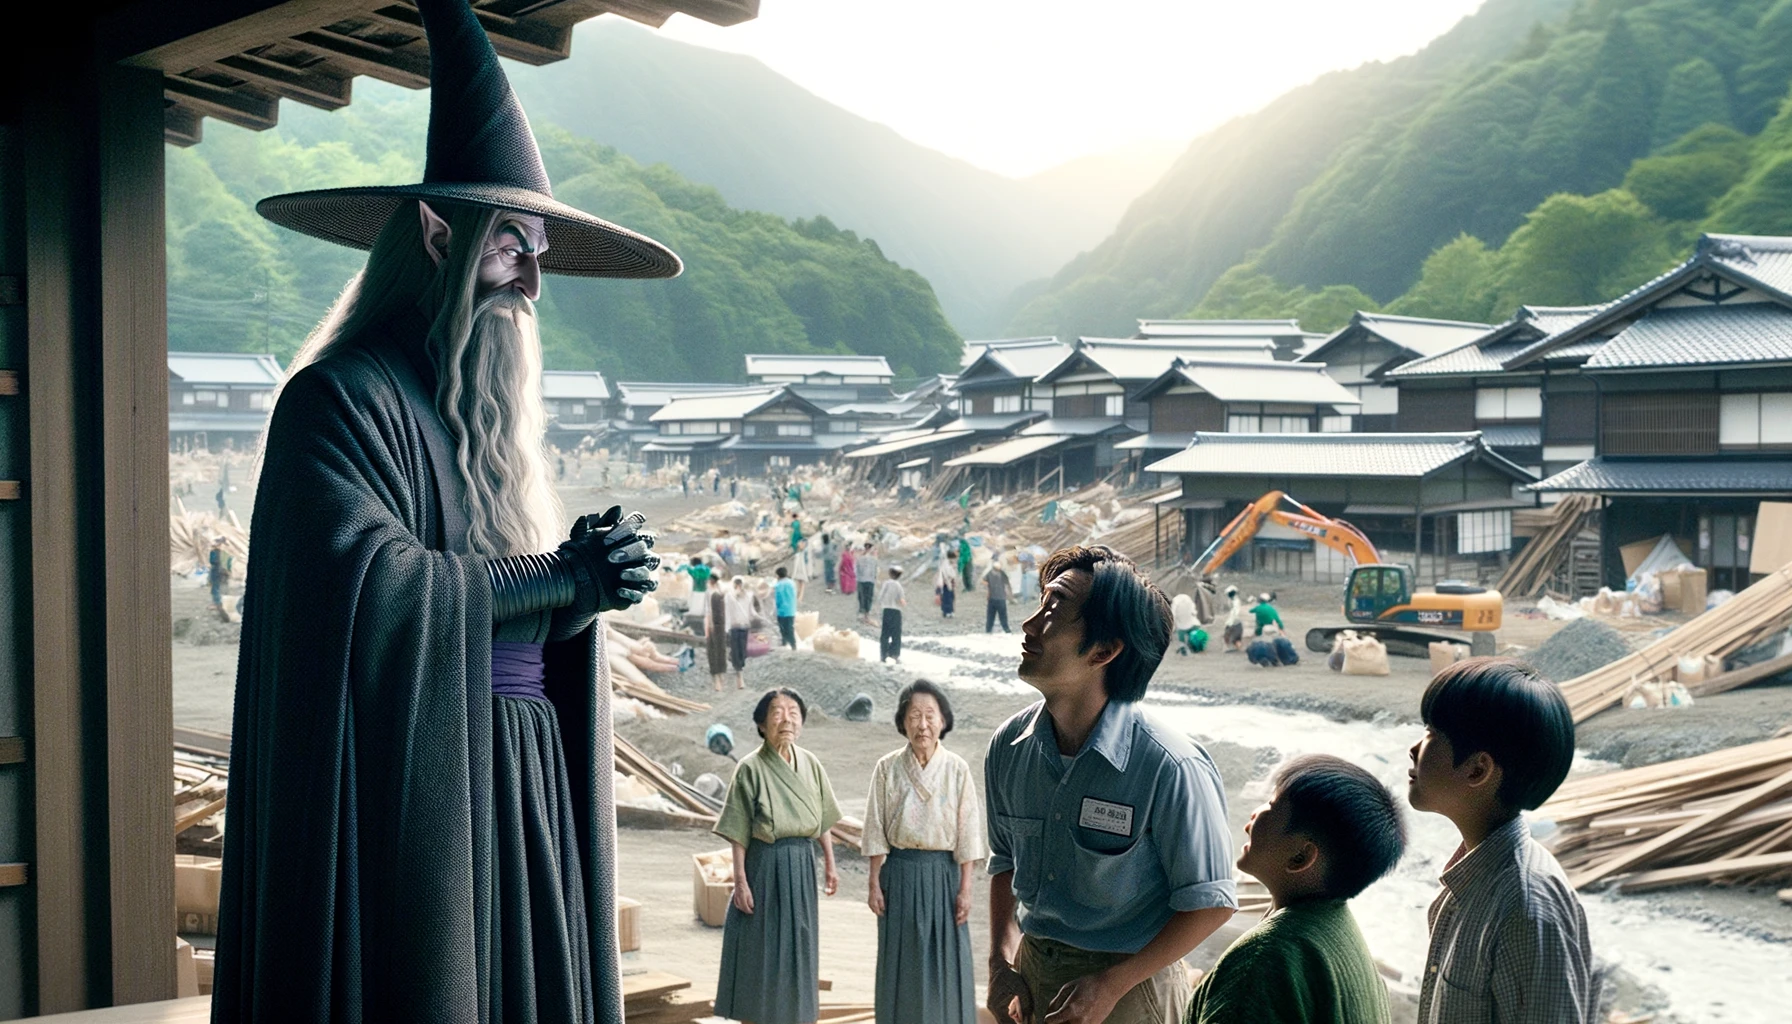 An image depicting the villain from a fantasy film about a young wizard engaging in supportive actions after the Great East Japan Earthquake. The villain, usually seen in a sinister light, is portrayed in a positive, humanitarian role. In the scene, the character is helping to rebuild a traditional Japanese village, wearing simple work clothes and interacting warmly with local residents, including children and elderly people. The background shows the lush, scenic landscape of rural Japan with construction materials and workers actively rebuilding homes and community centers.